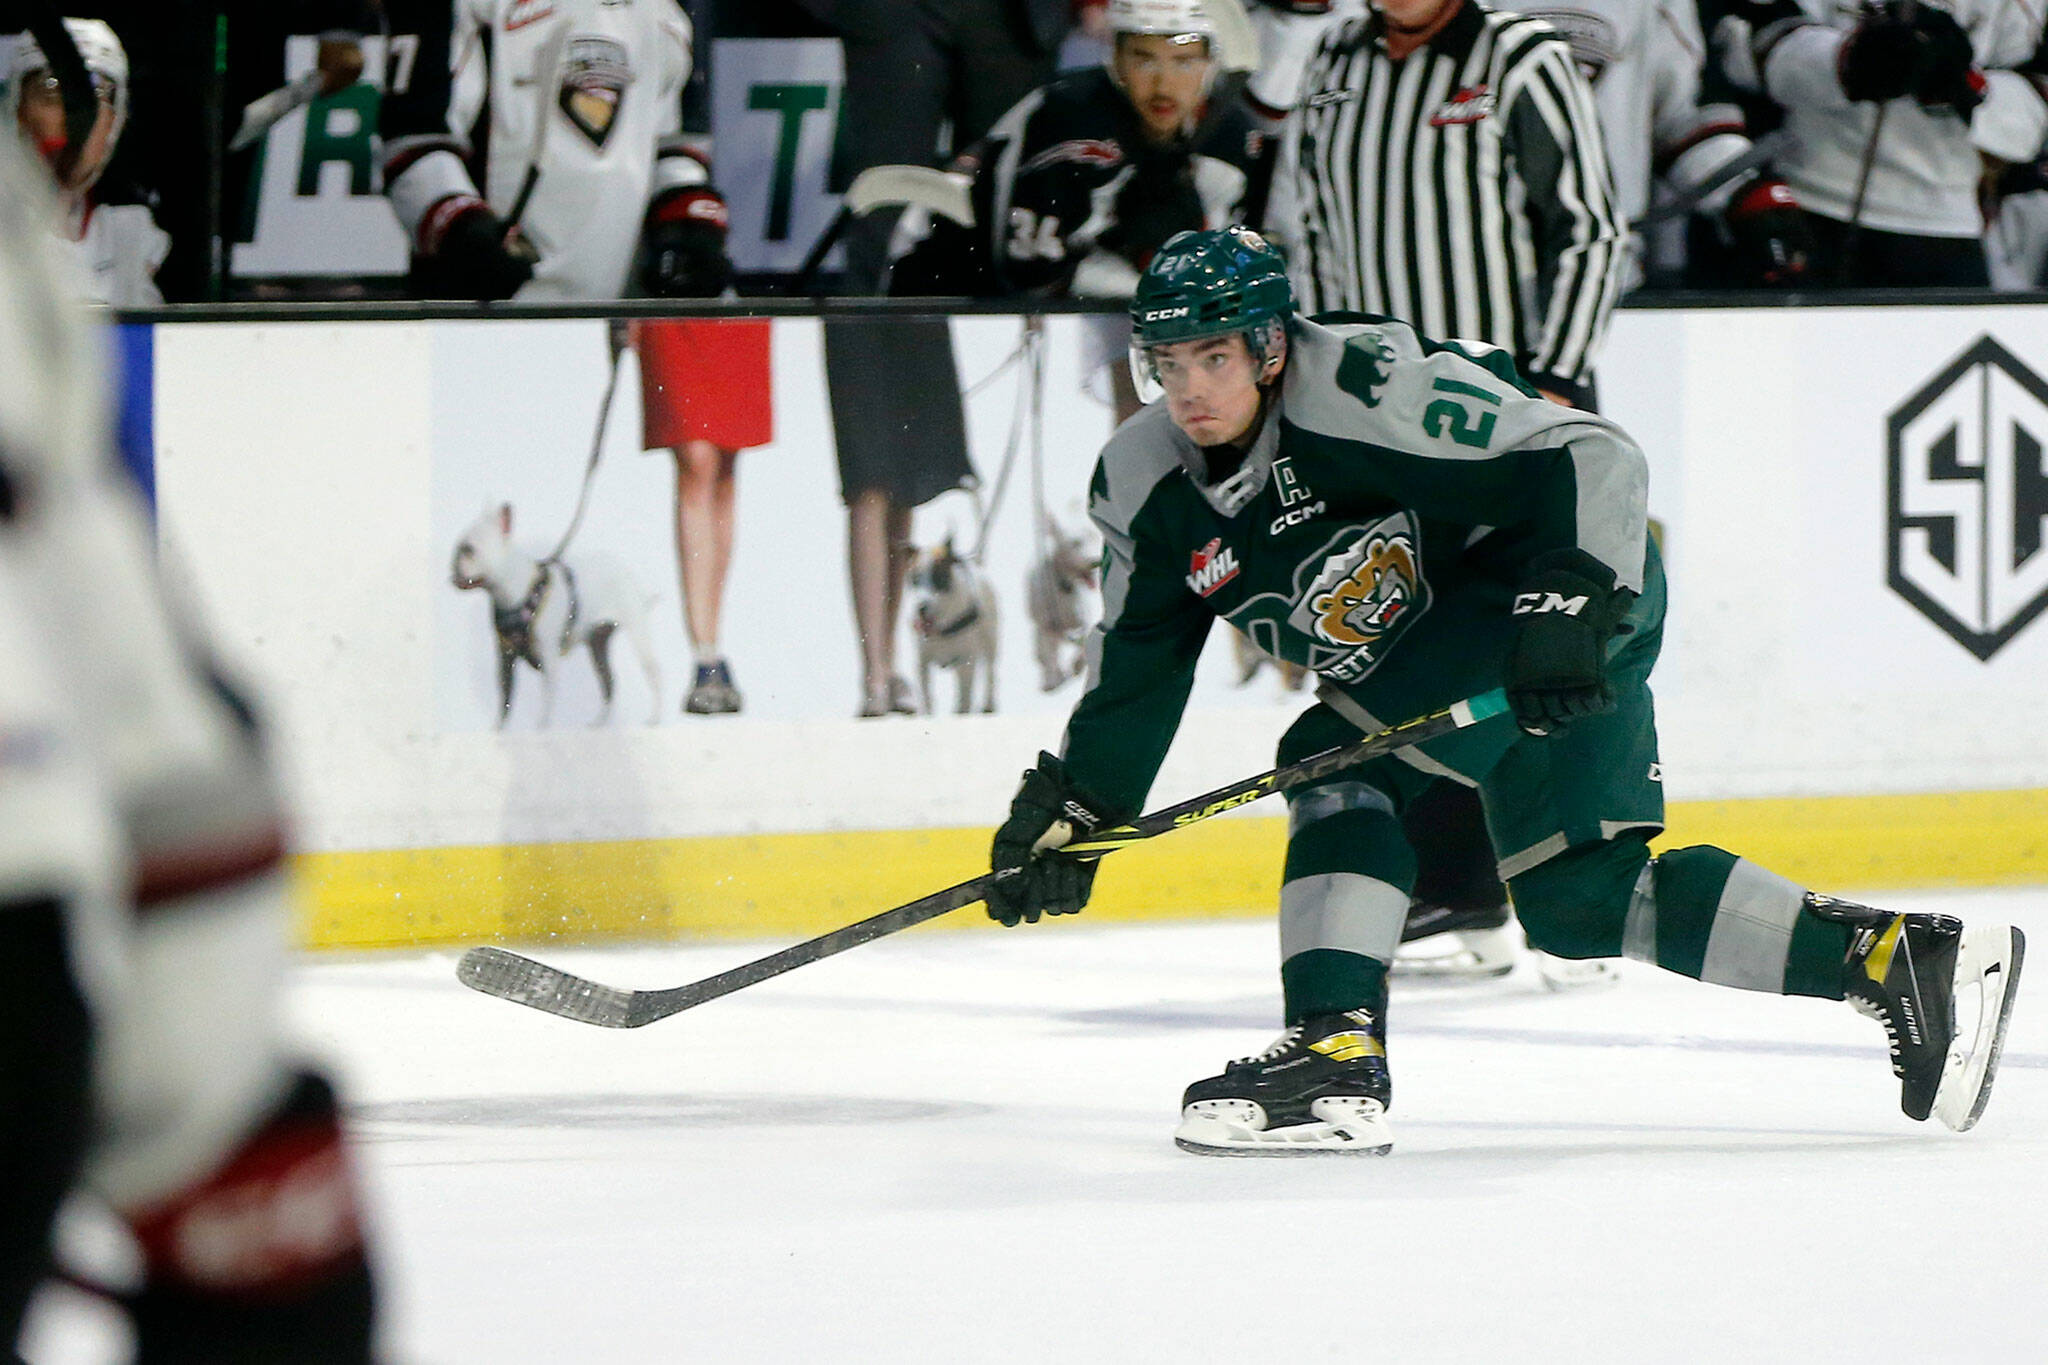 Everett Silvertips’ Dylan Anderson sends the puck behind the net during the season opener against the Vancouver Giants on Saturday, Sep. 24, 2022, at Angel of the Winds Arena in Everett, Washington. (Ryan Berry / The Herald)